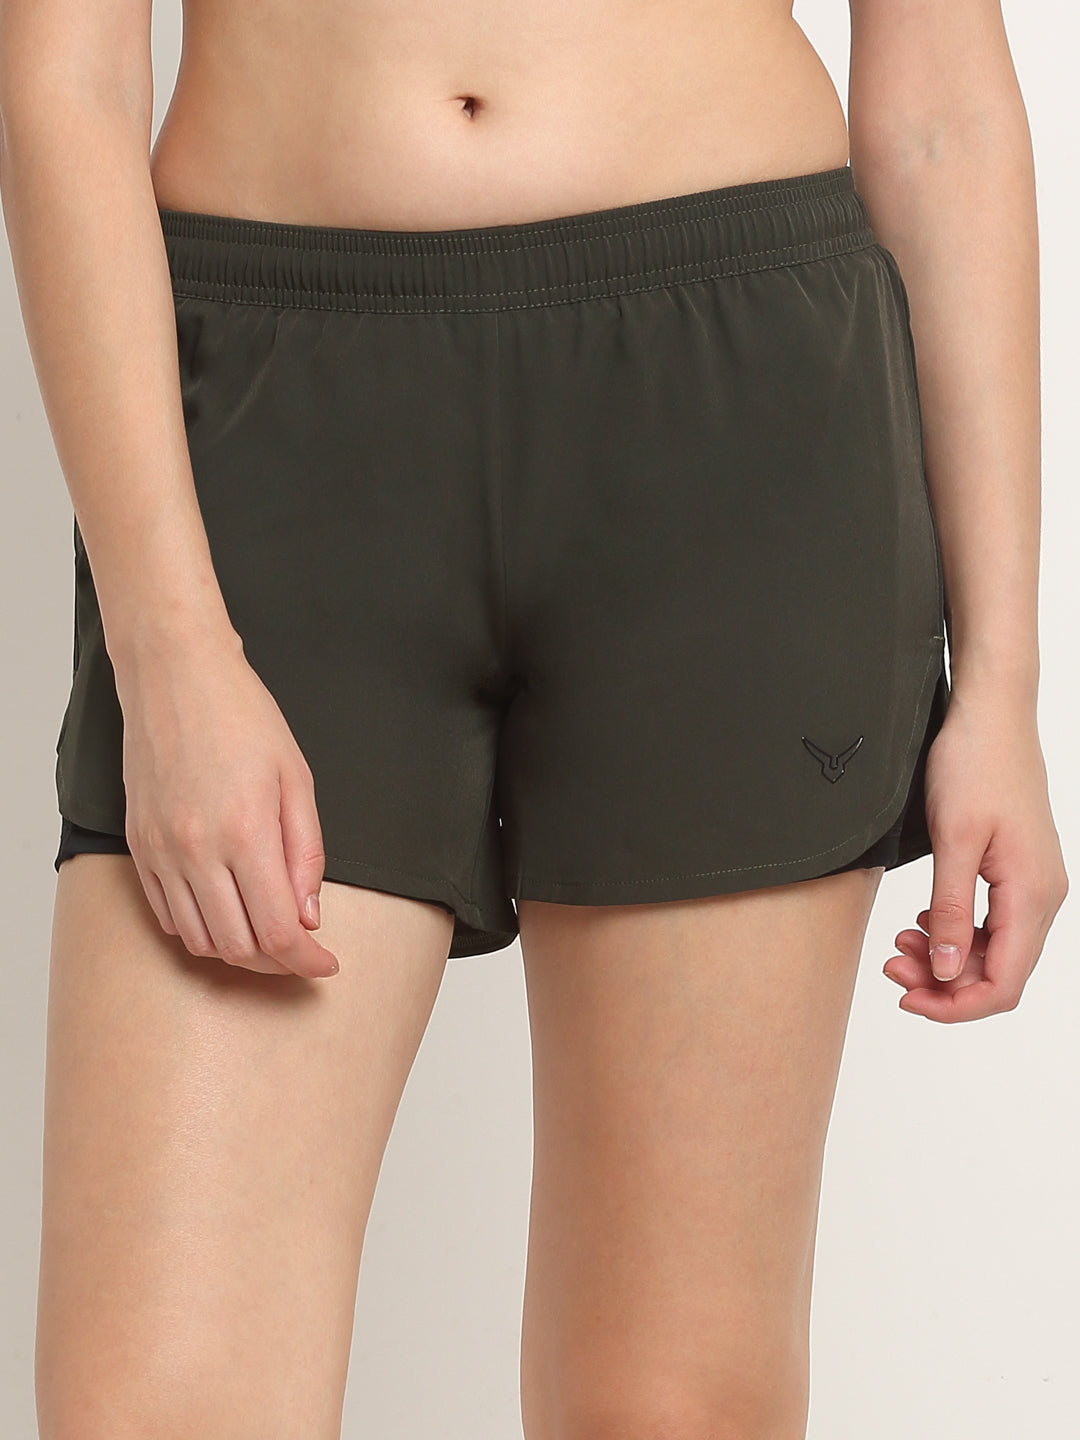 Invincible Women's Double Layered Shorts